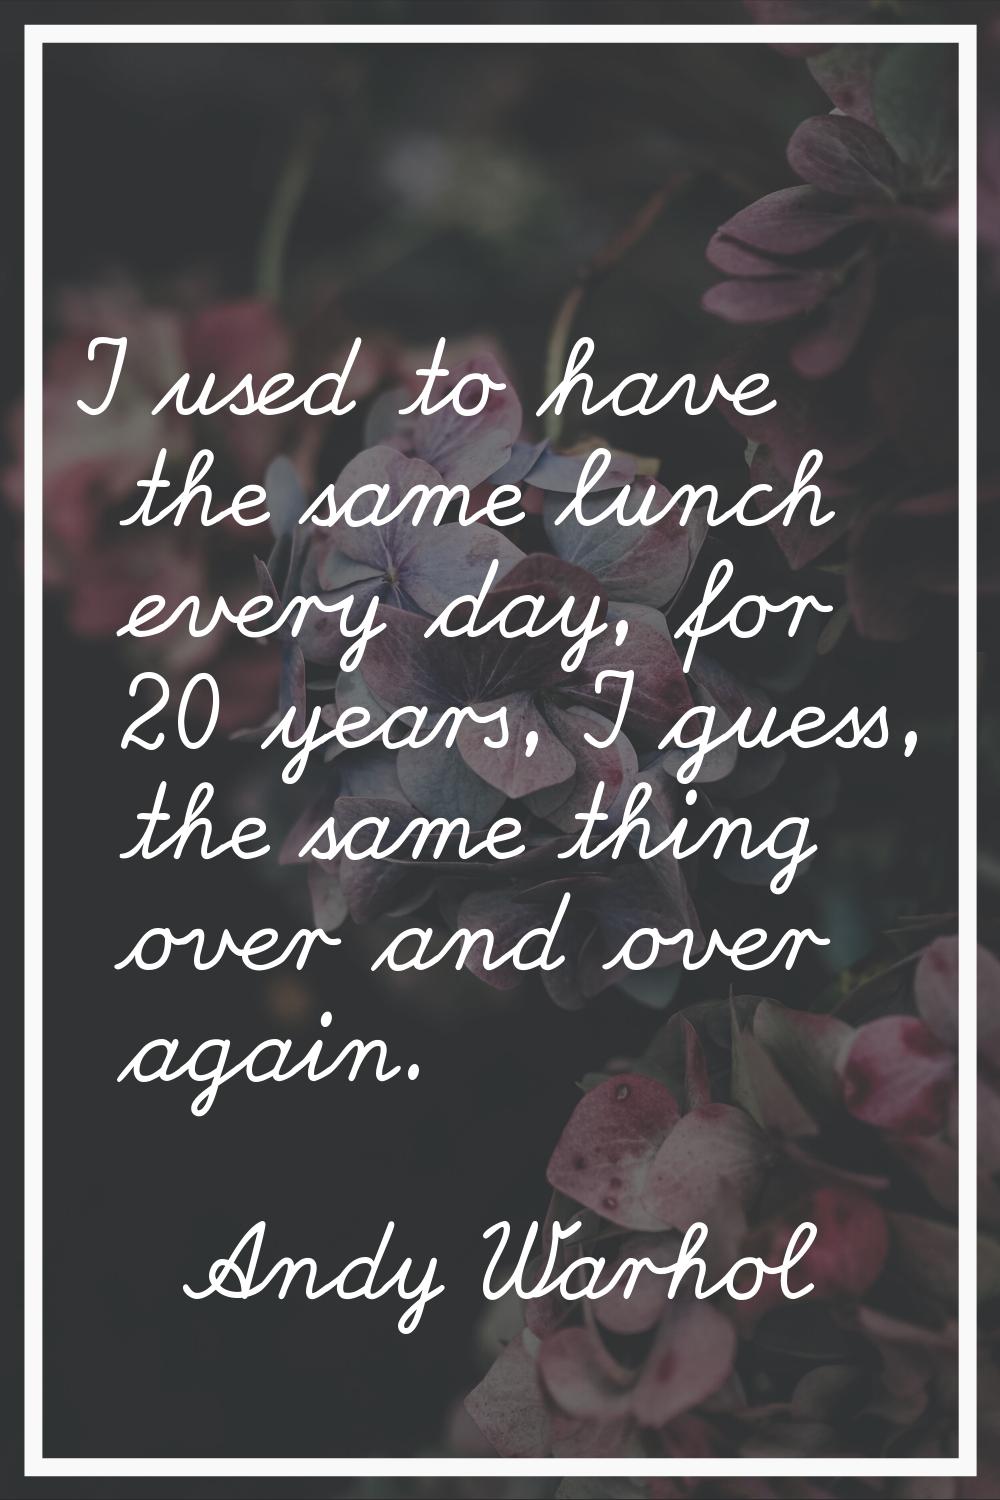 I used to have the same lunch every day, for 20 years, I guess, the same thing over and over again.